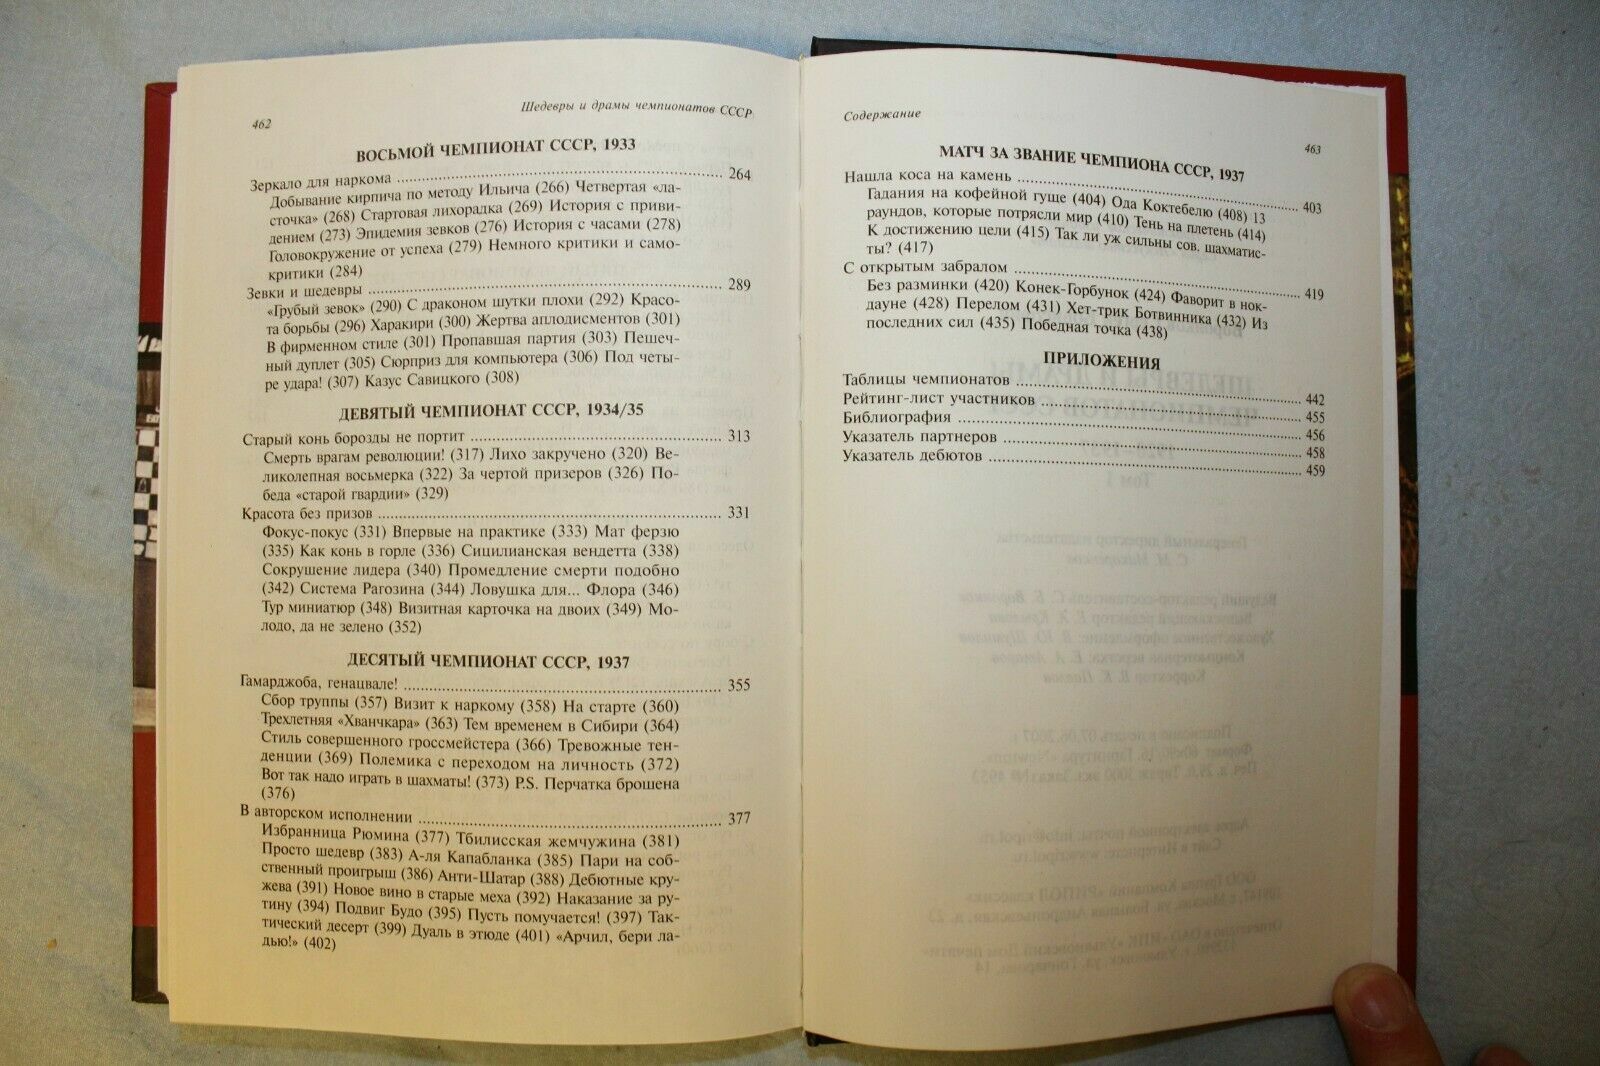 11368.Masterpieces and Dramas of USSR Chess Championships. S. Voronkov Vol1 1920-37